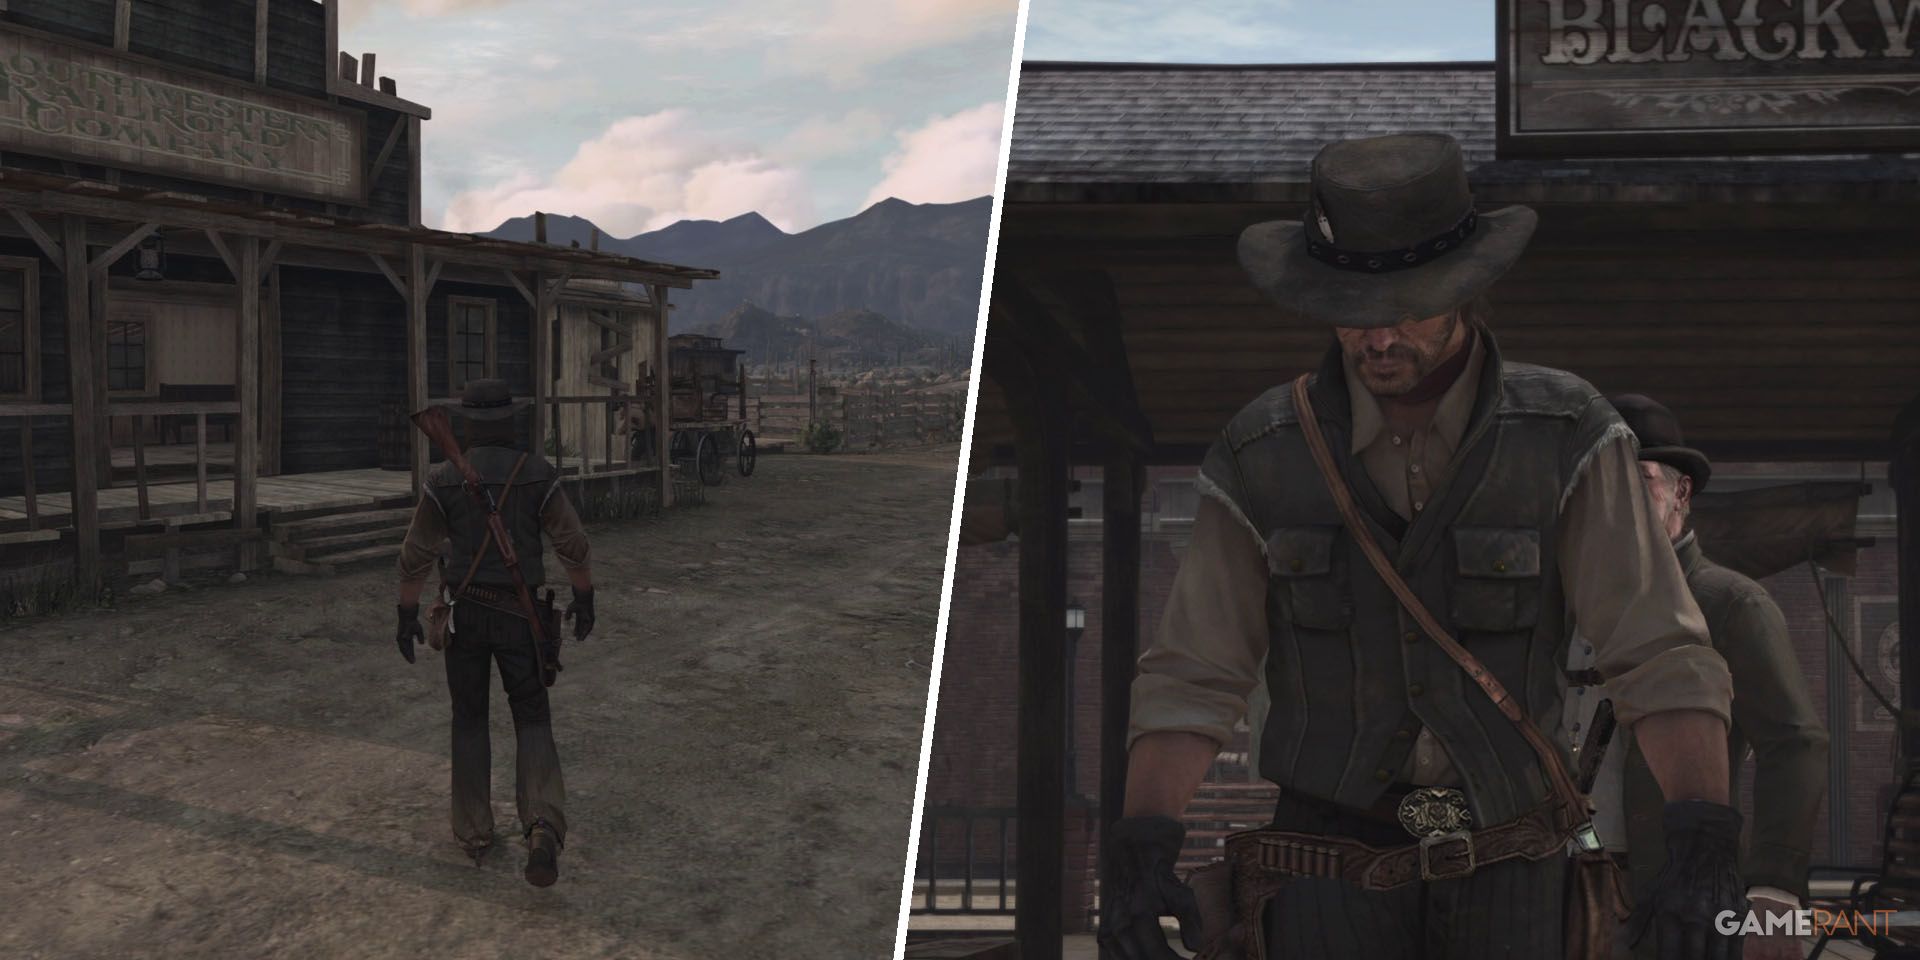 Red Dead Redemption Trophy Guide & Road Map